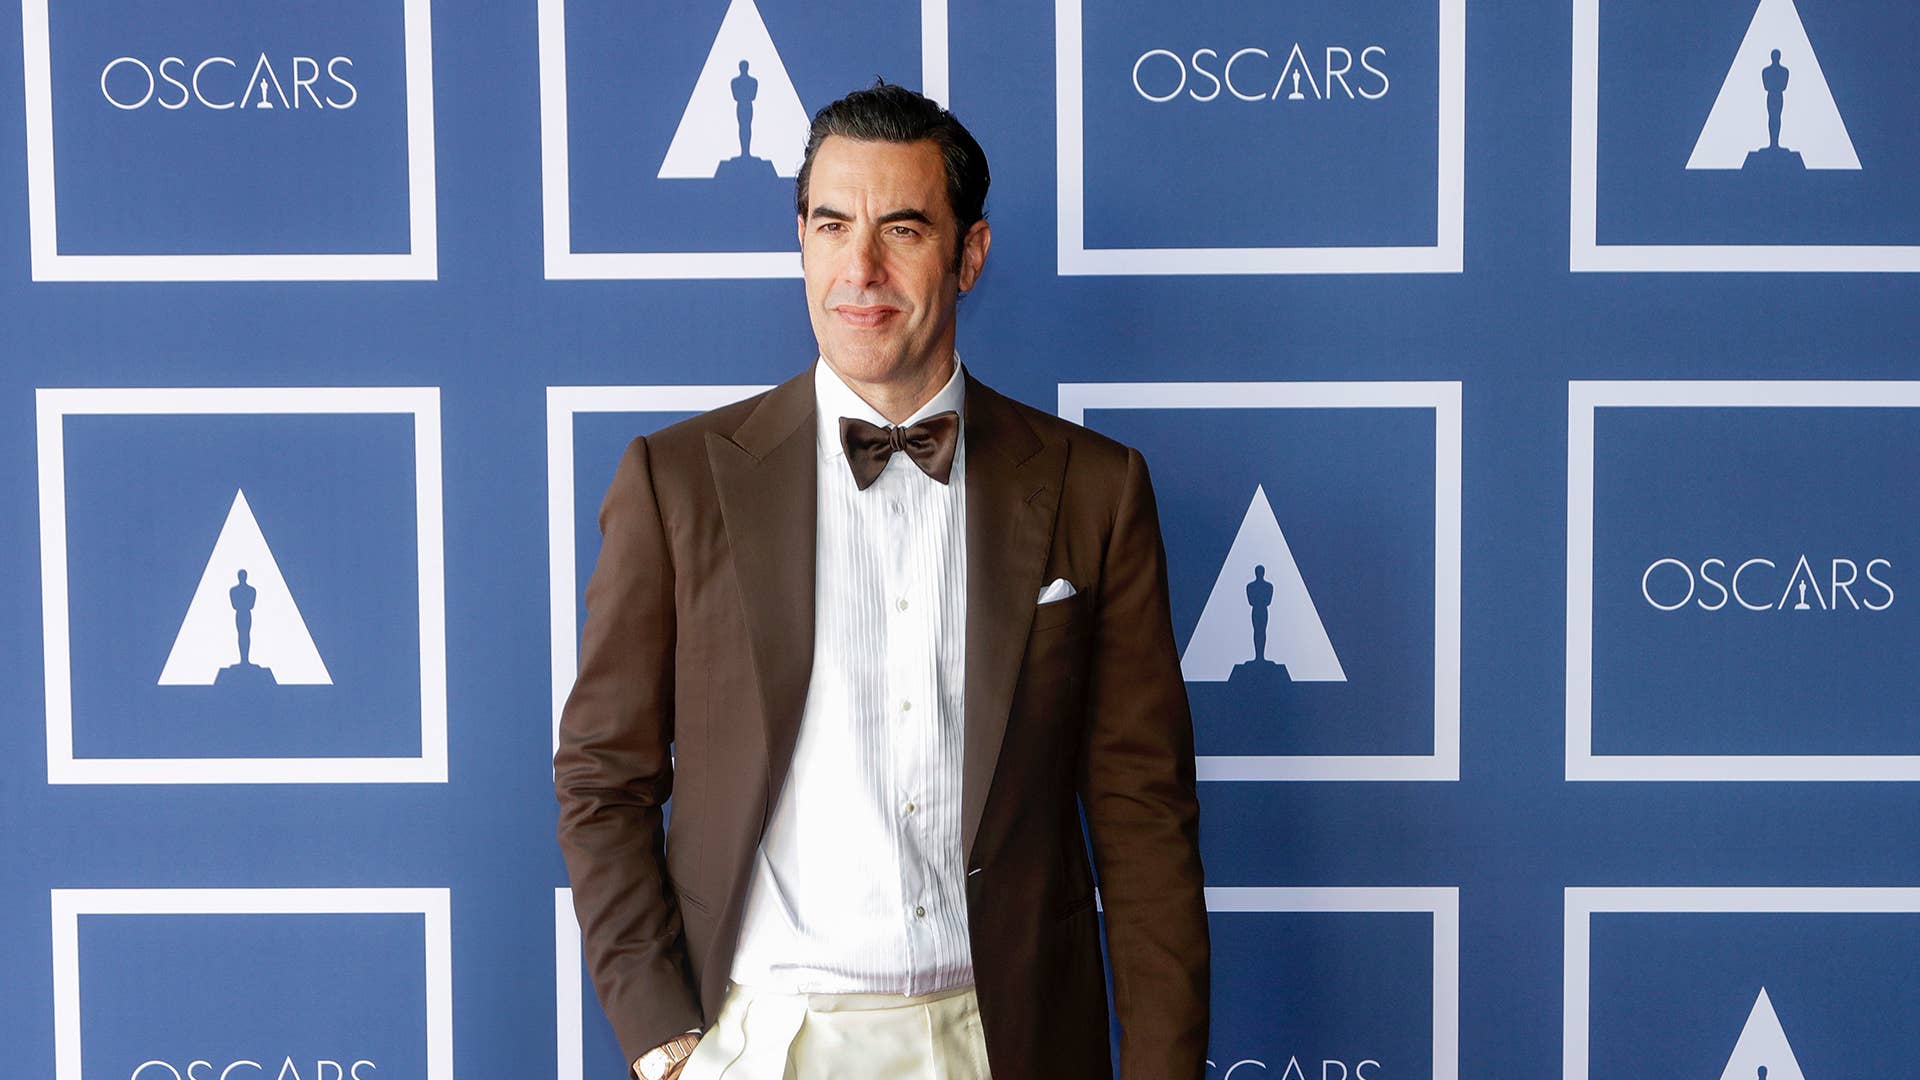 Sacha Baron Cohen attends a screening of the Oscars